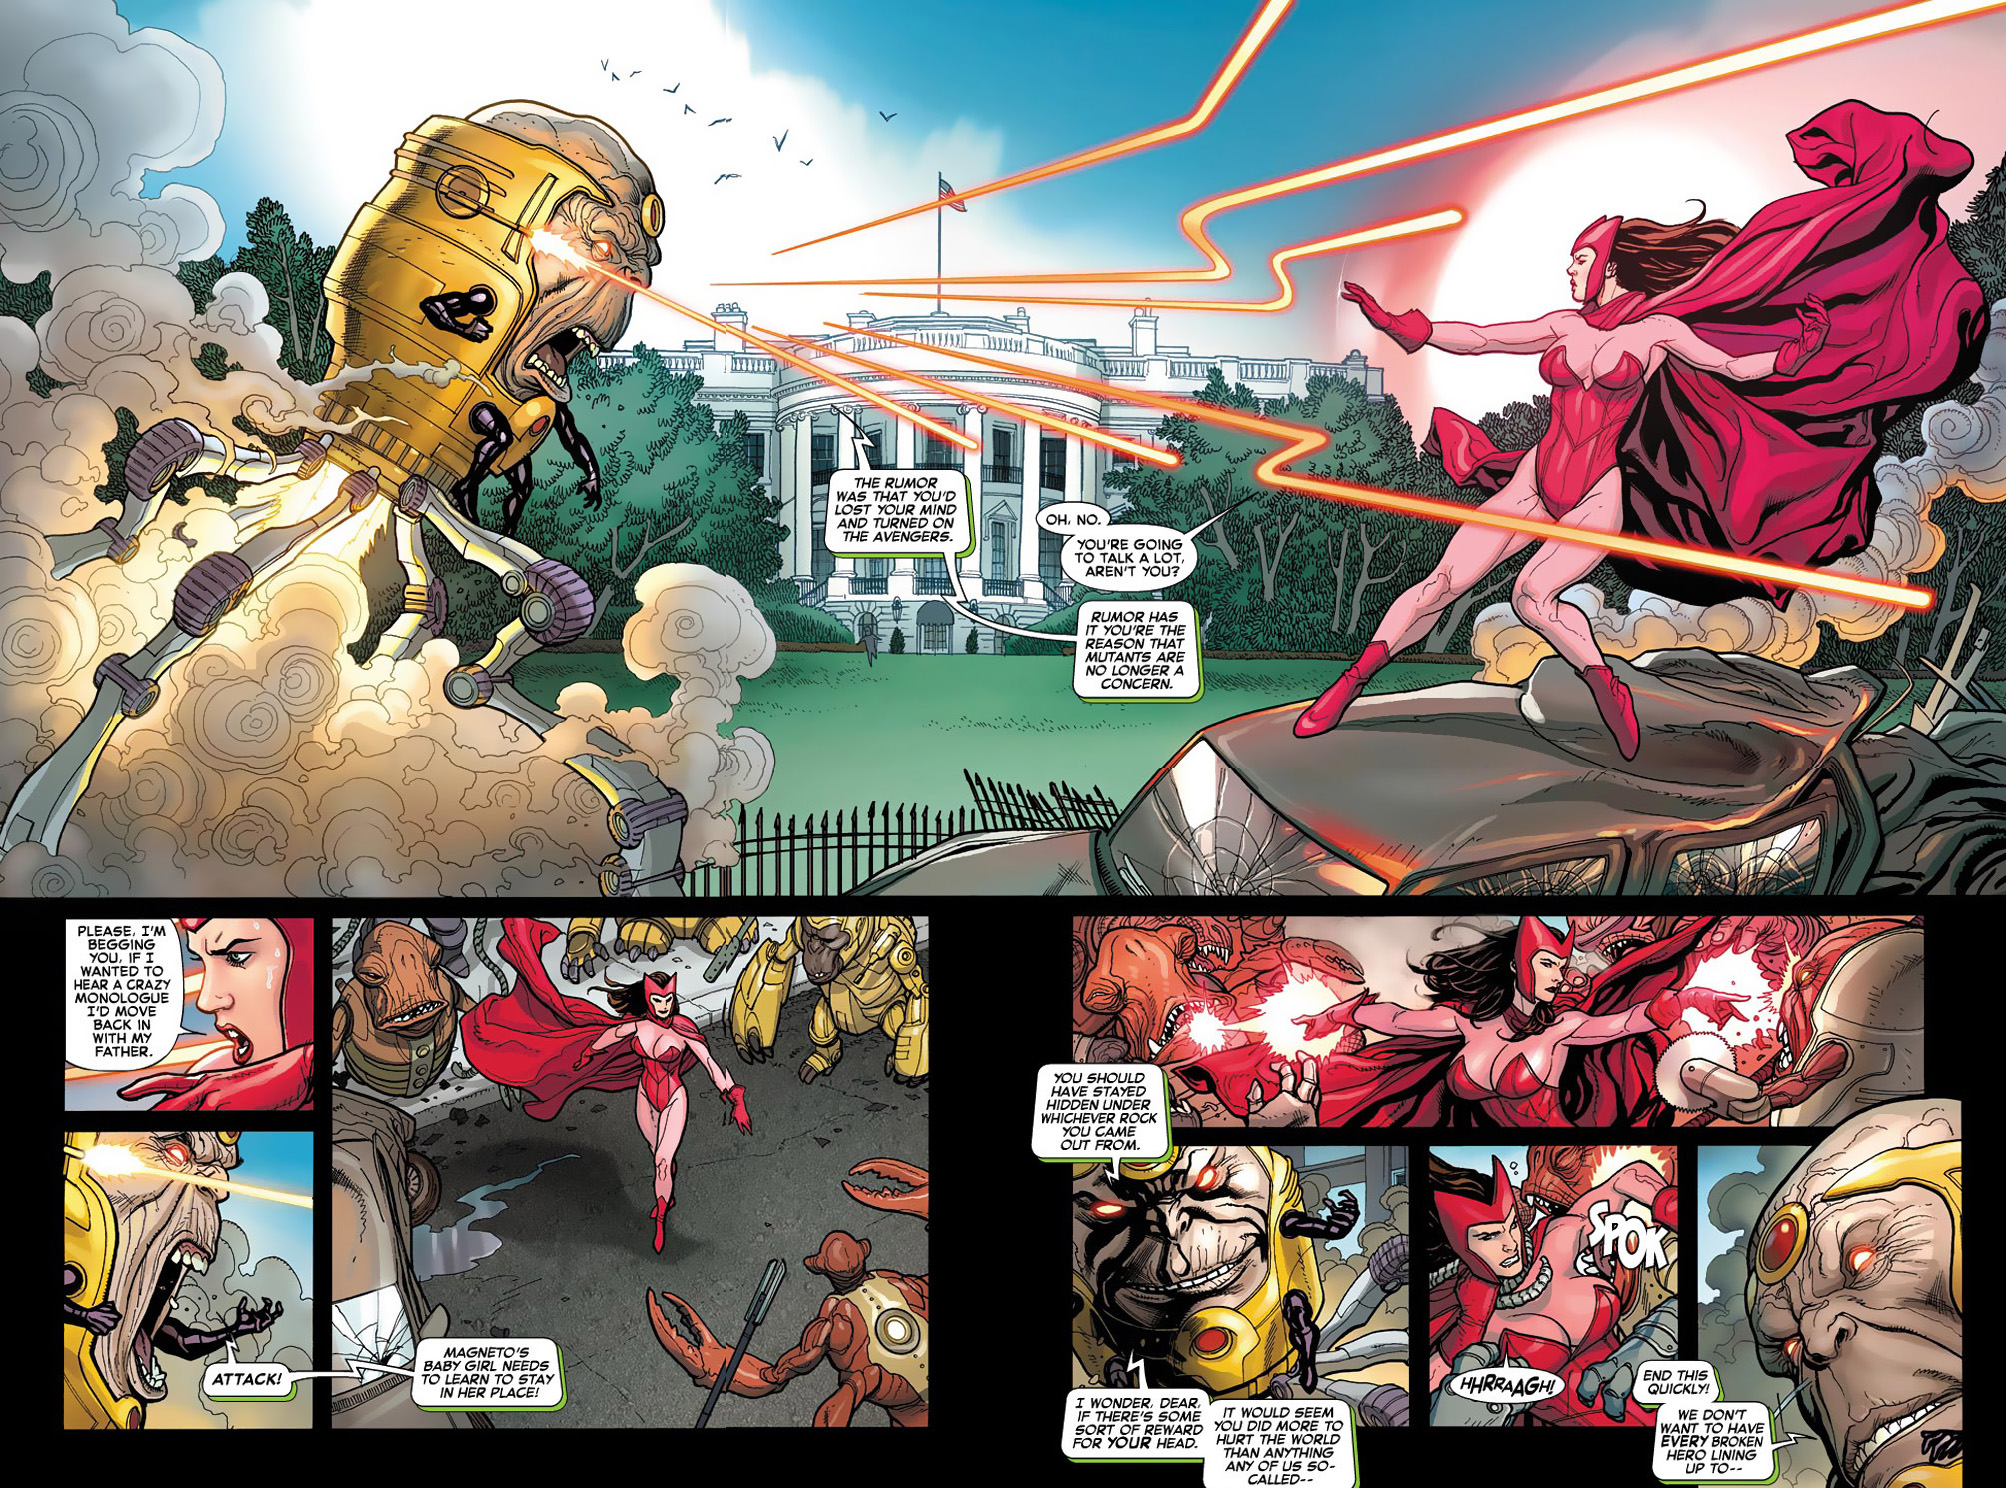 scarlett witch, spider-woman and Miss Marvel VS modok